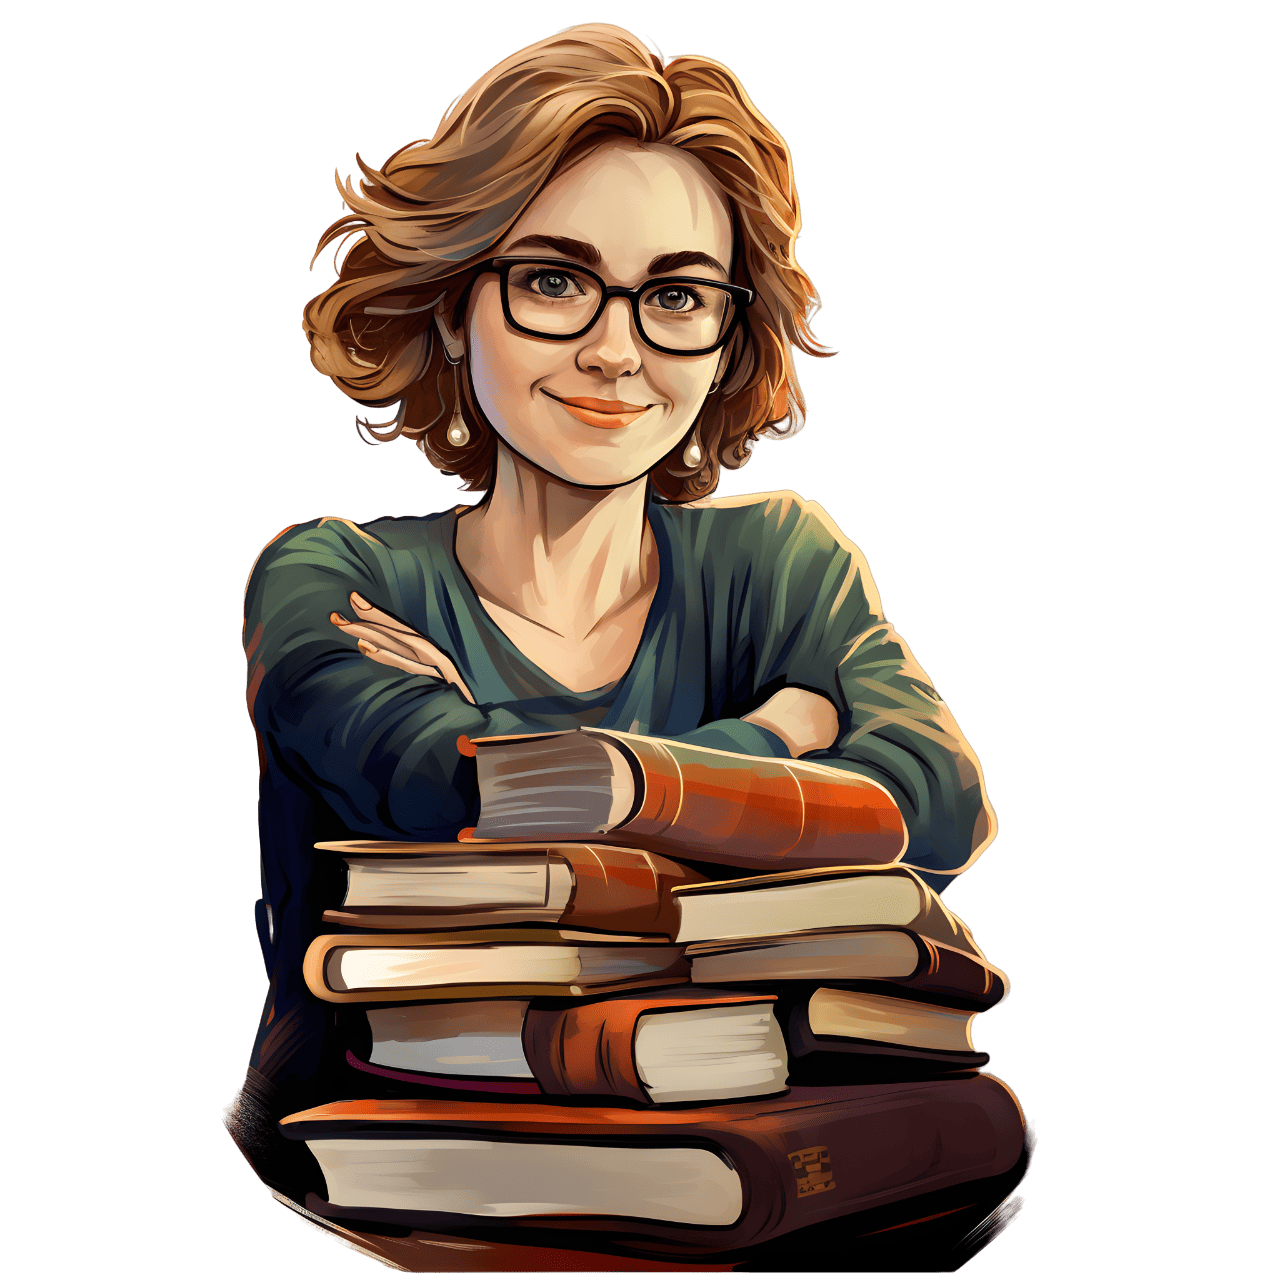 An artist with glasses sitting on a pile of books.